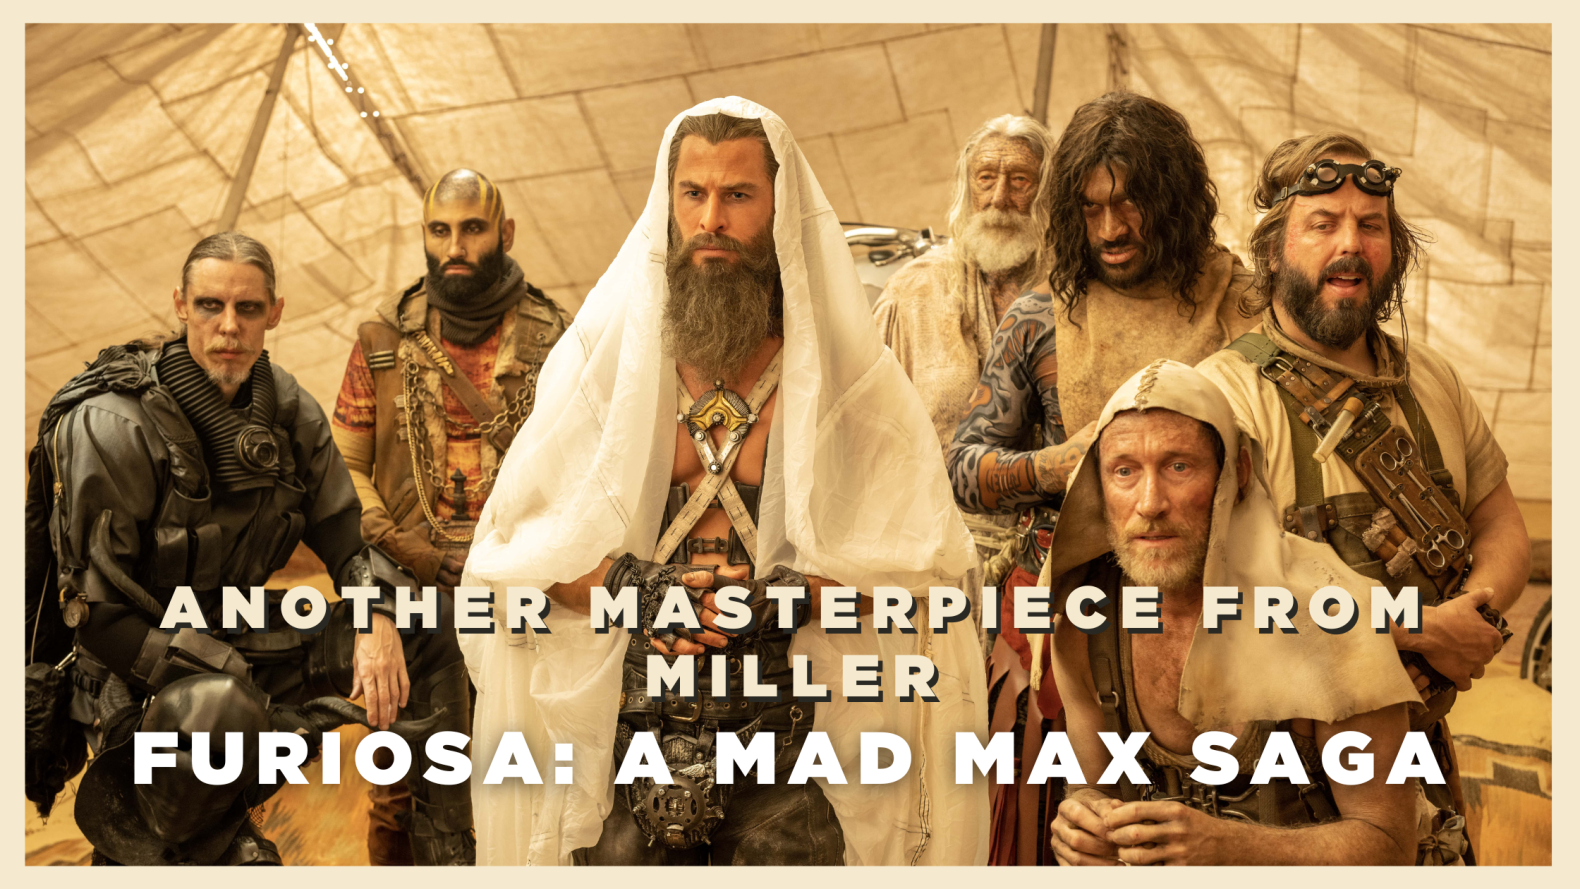 Furiosa: A Mad Max Saga – Another Masterpiece from Miller